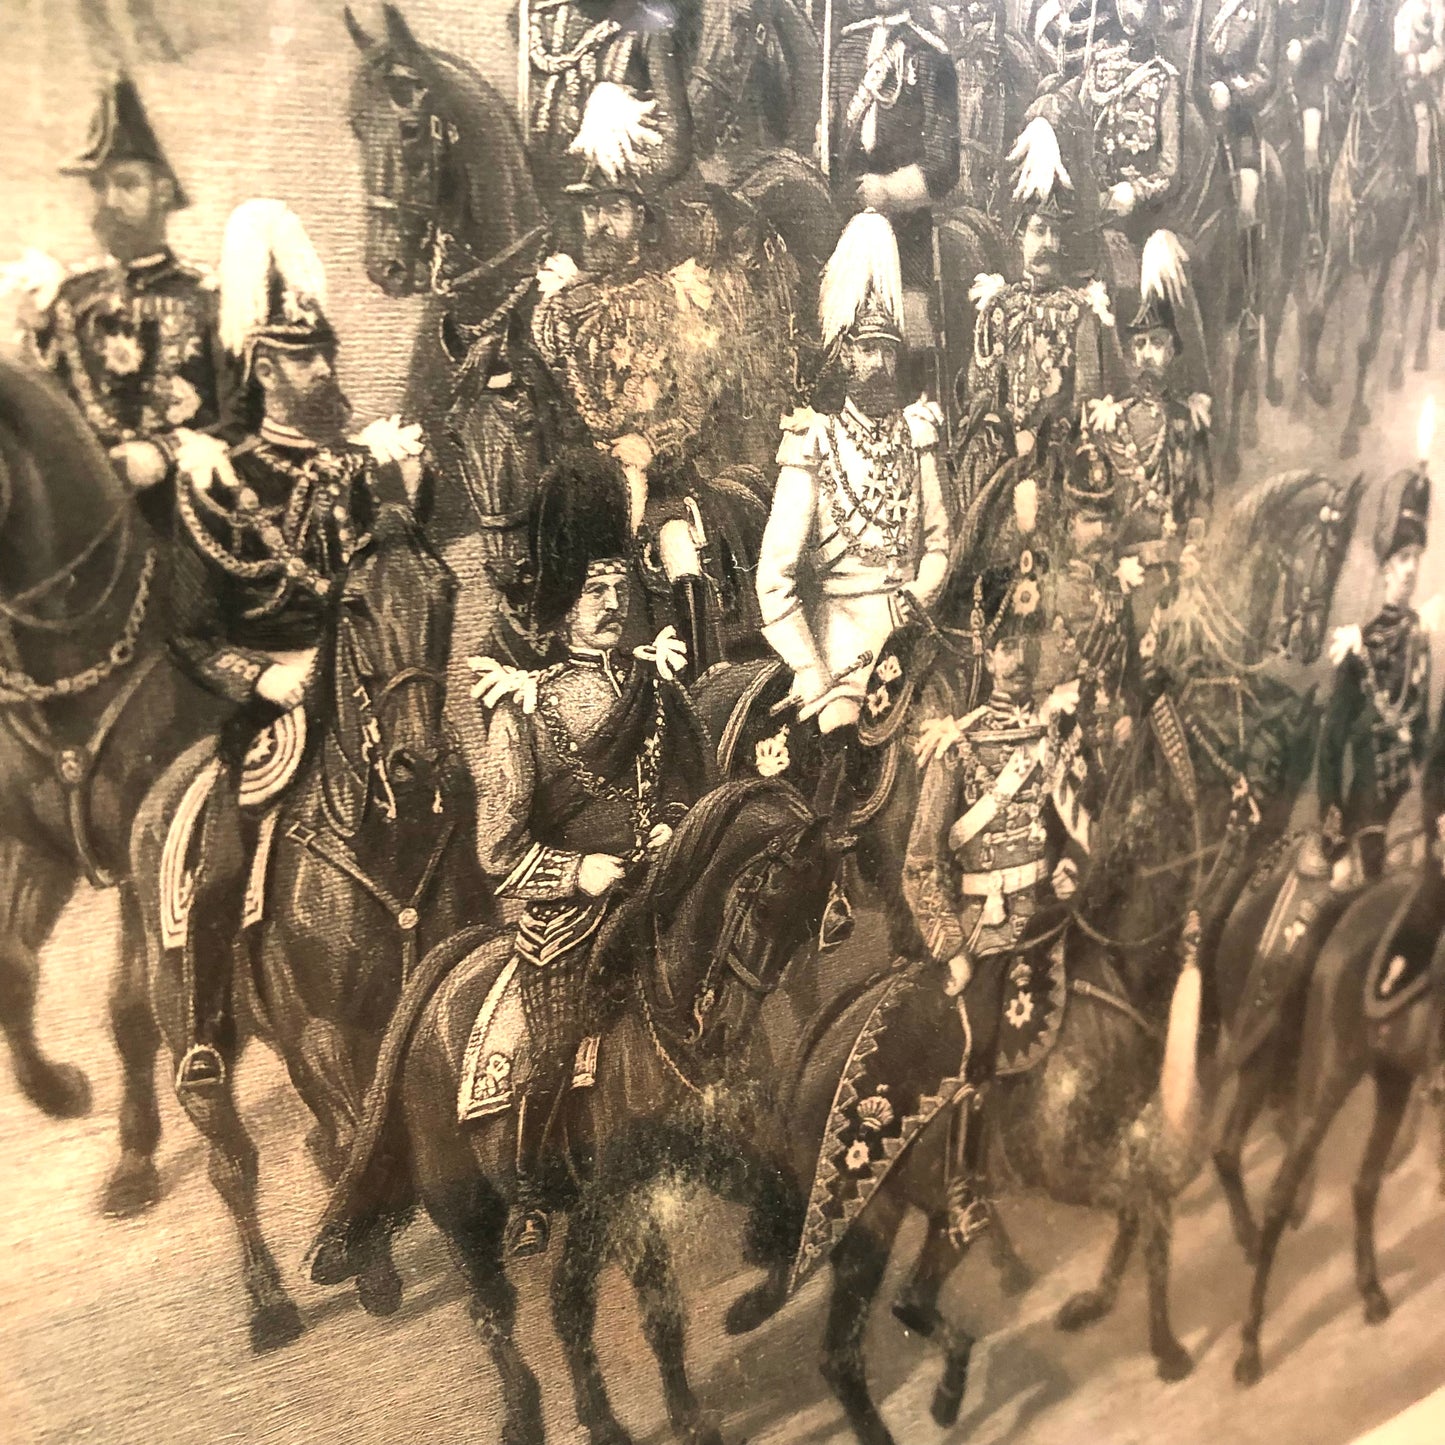 Queen Victoria's Jubilee Procession, Framed Engraving behind Glass